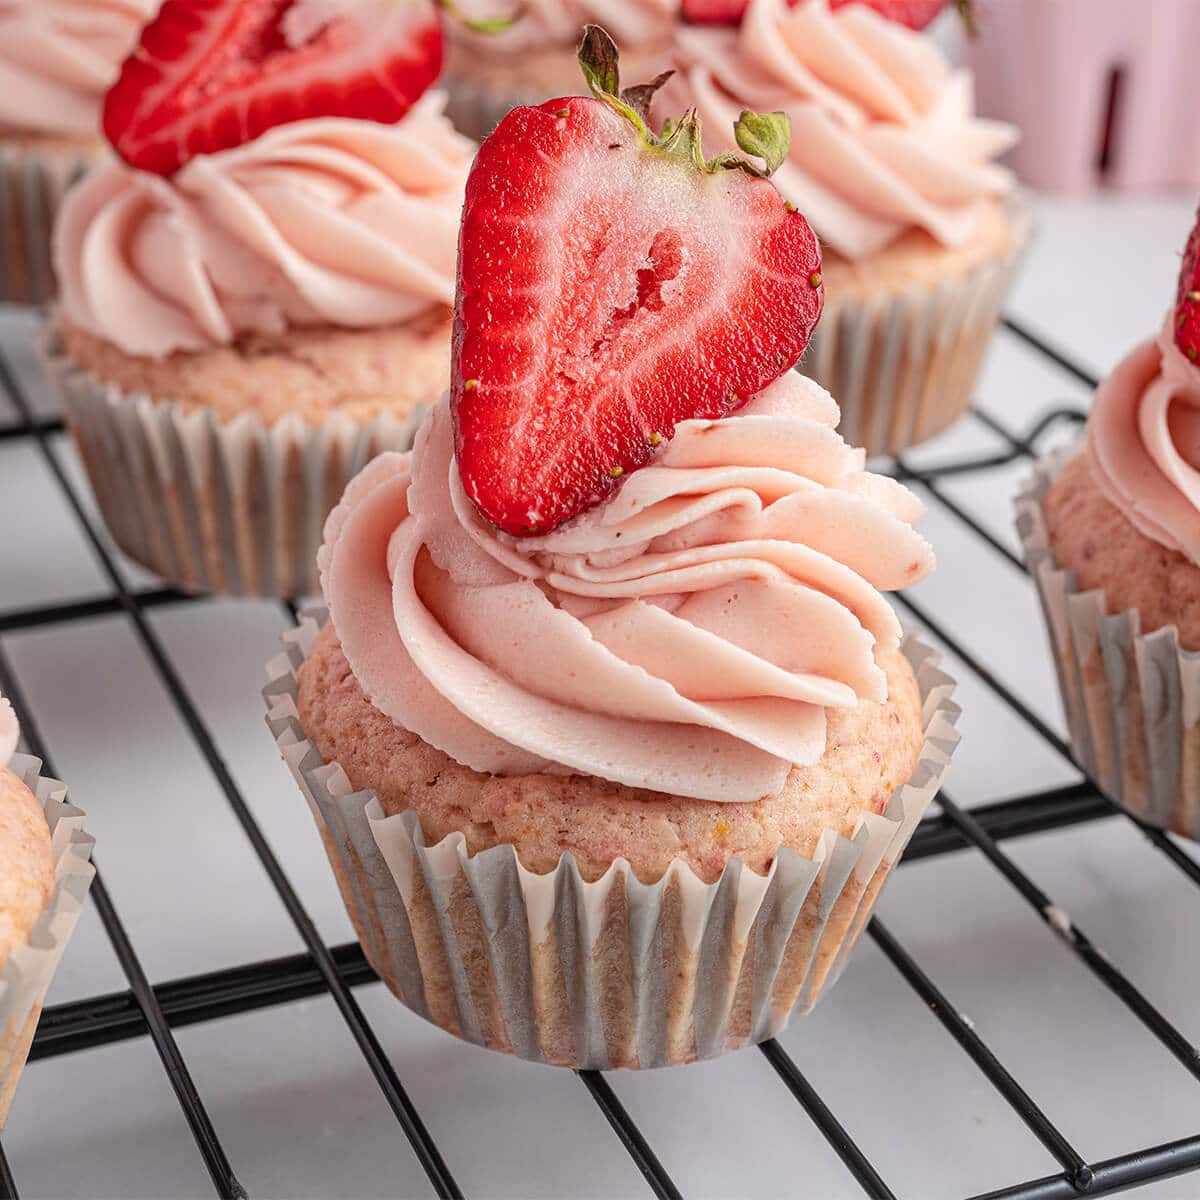 A close up of a strawberry cupcake with frosting and fresh strawberry.